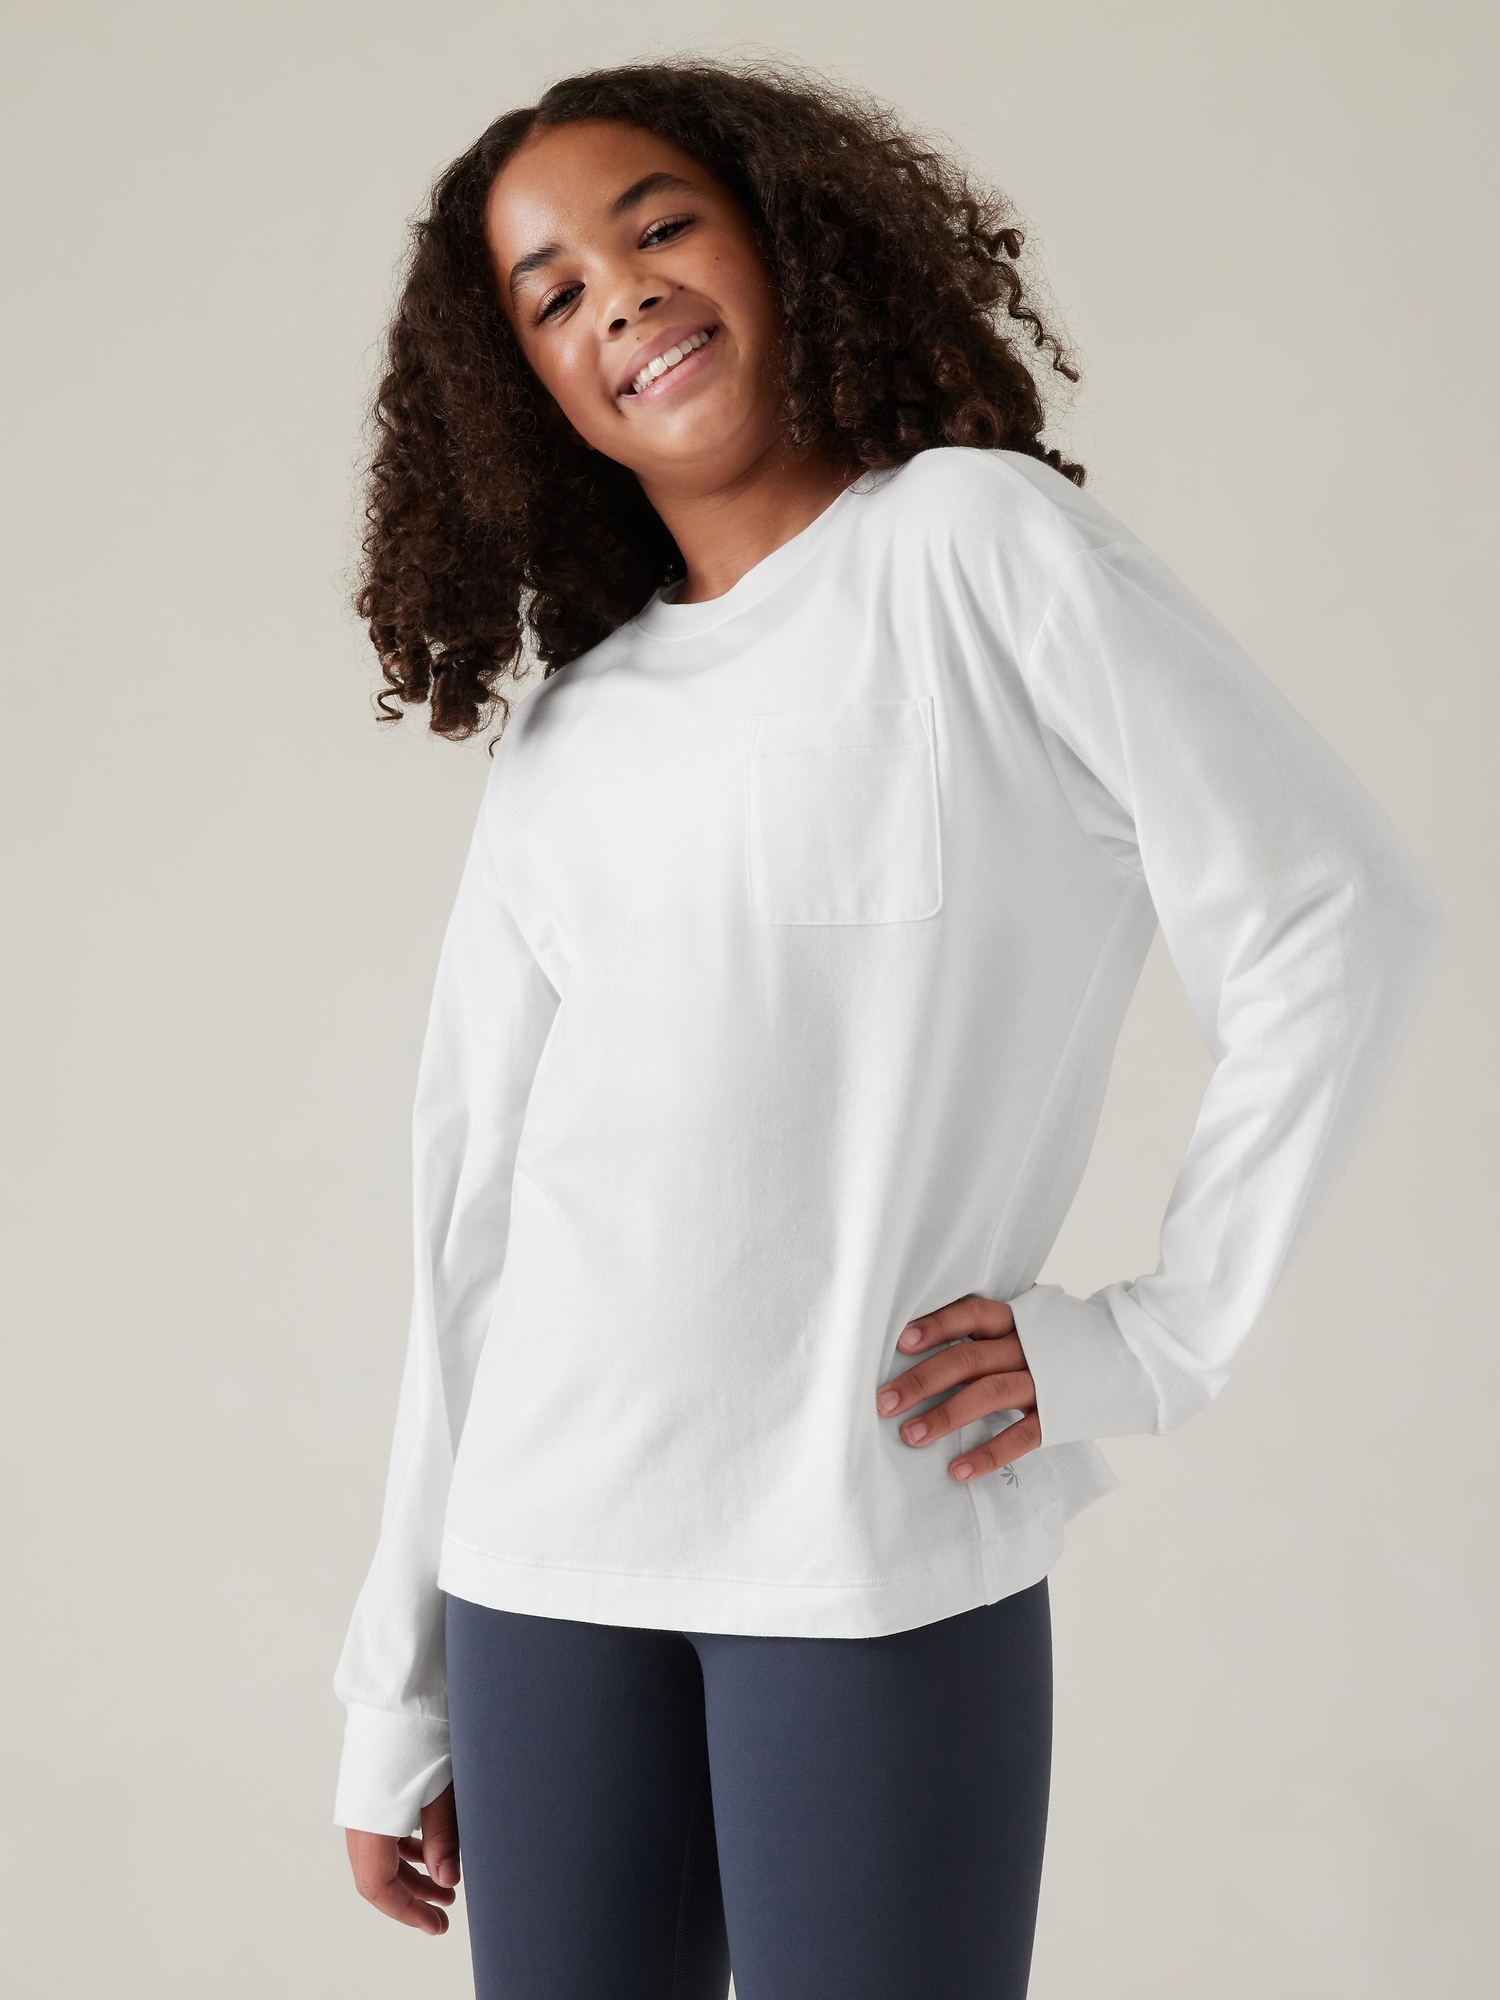 Athleisure Tops for Women